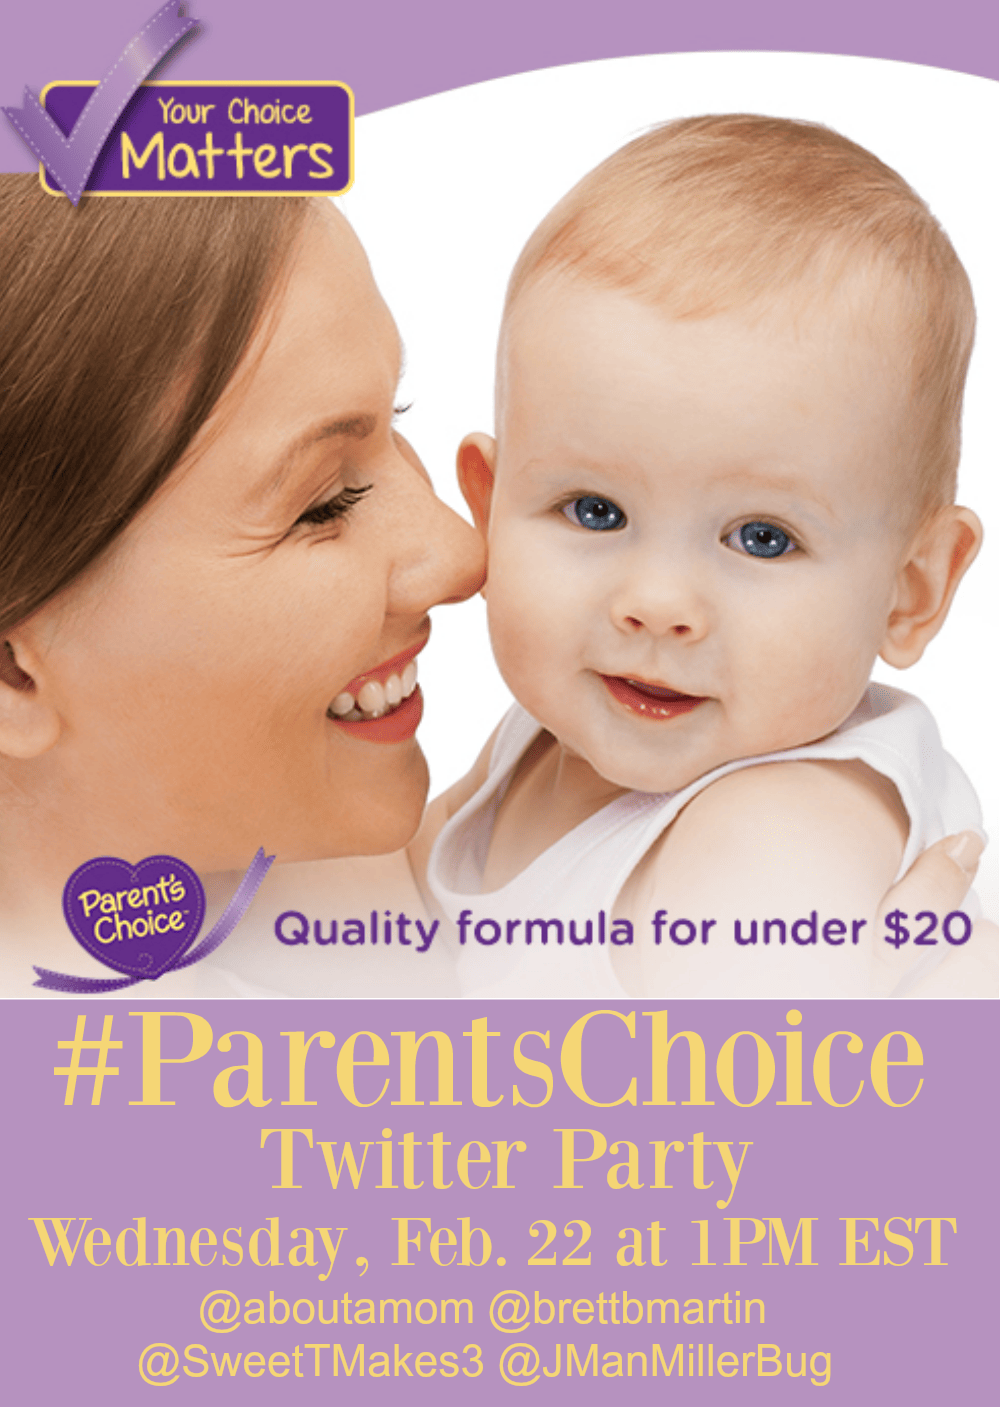 RSVP for #ParentsChoice Twitter Party